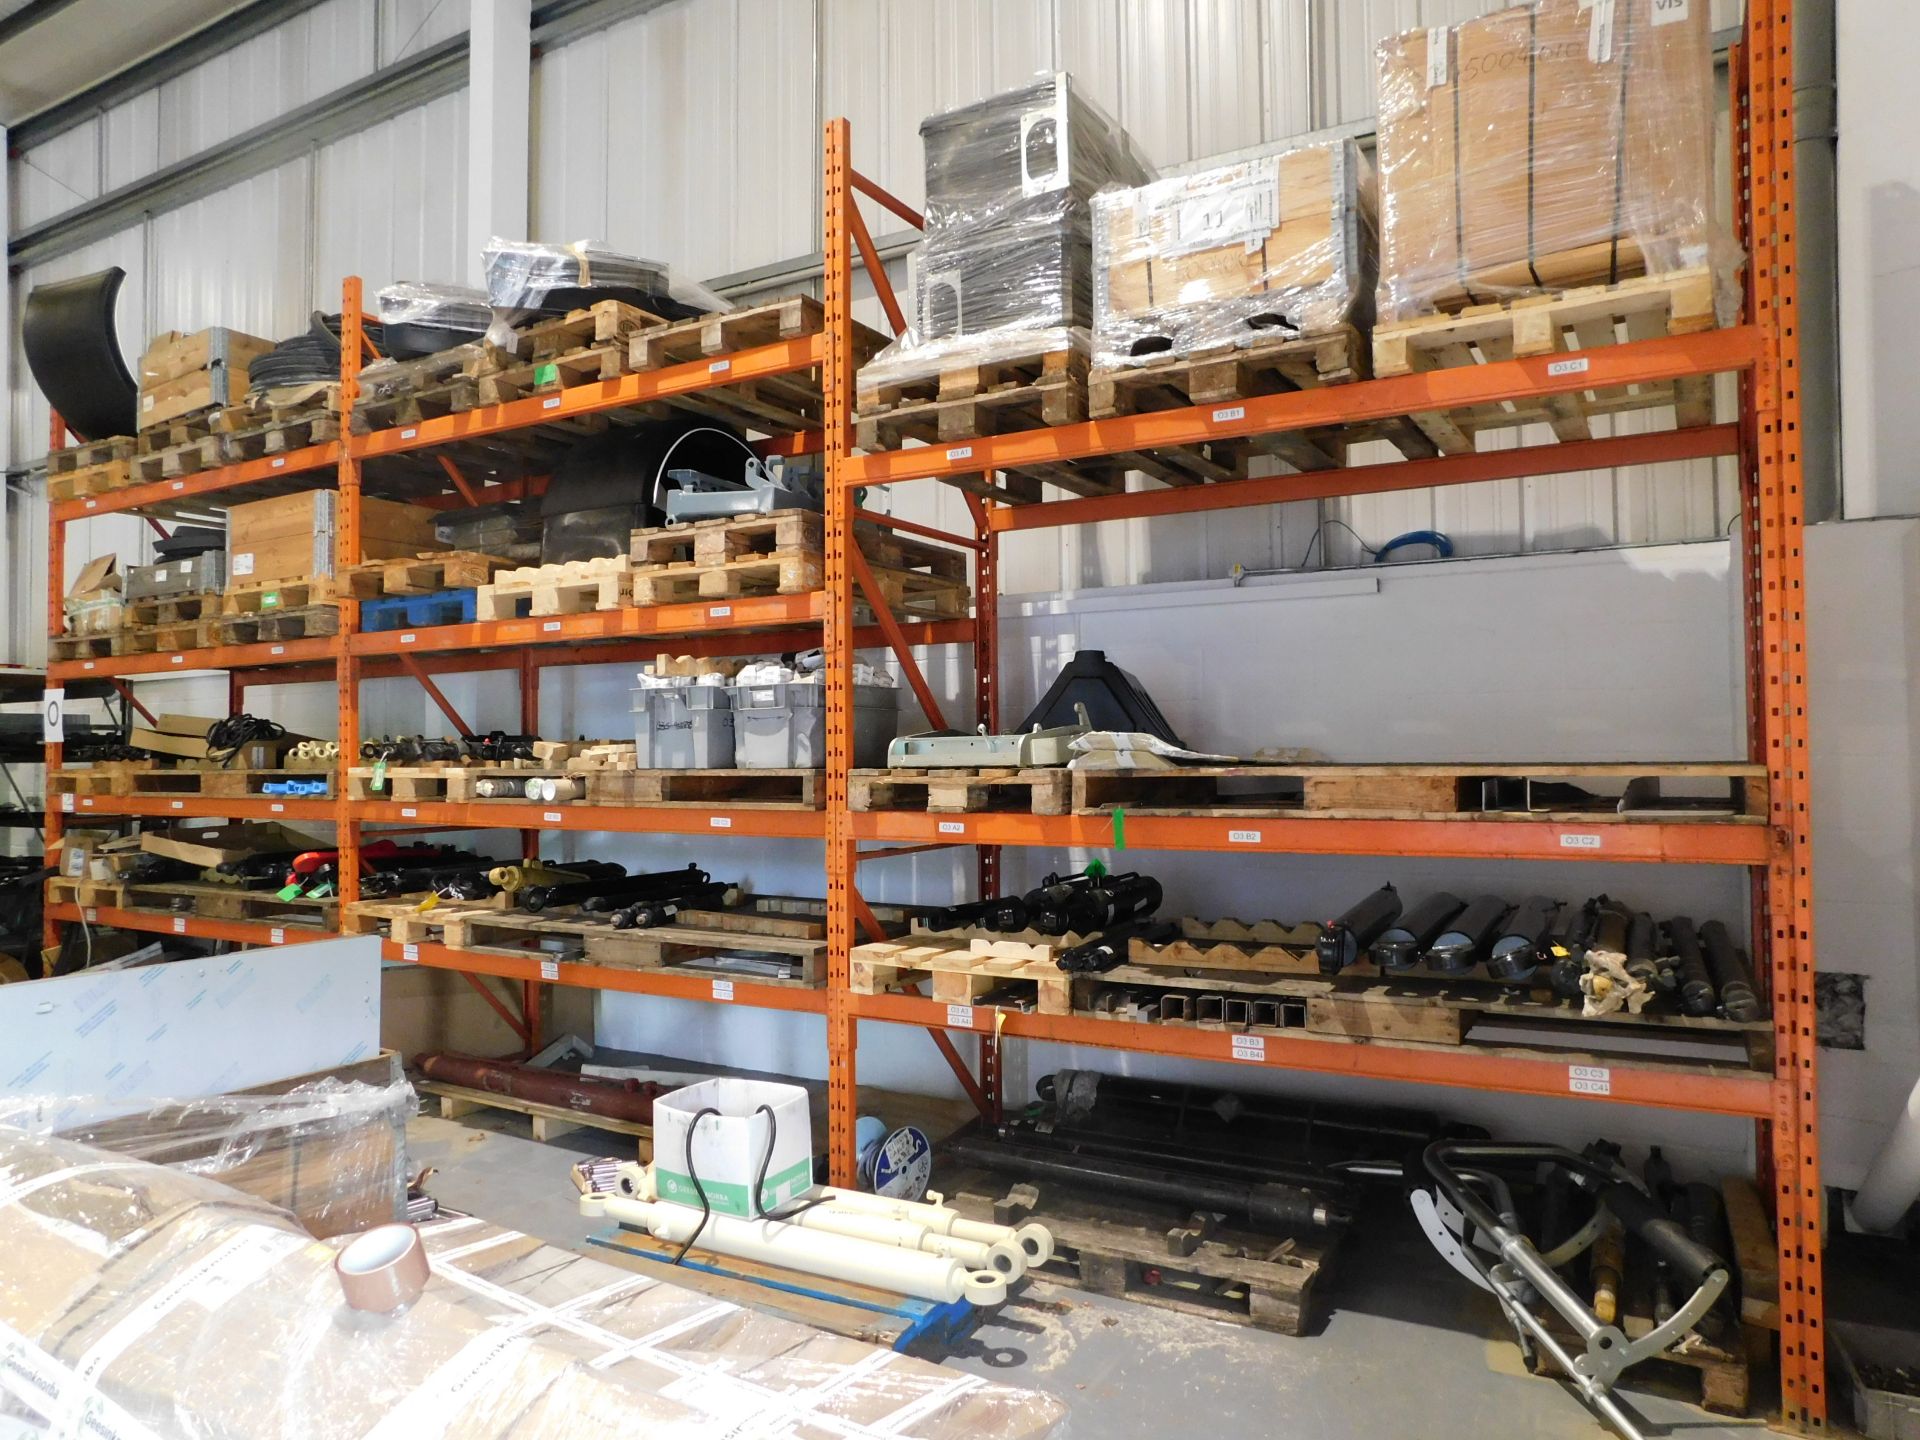 3 Bays of Boltless Pallet Racking (Excluding Contents) (Collection Delayed to Tuesday 18th June - Image 2 of 5